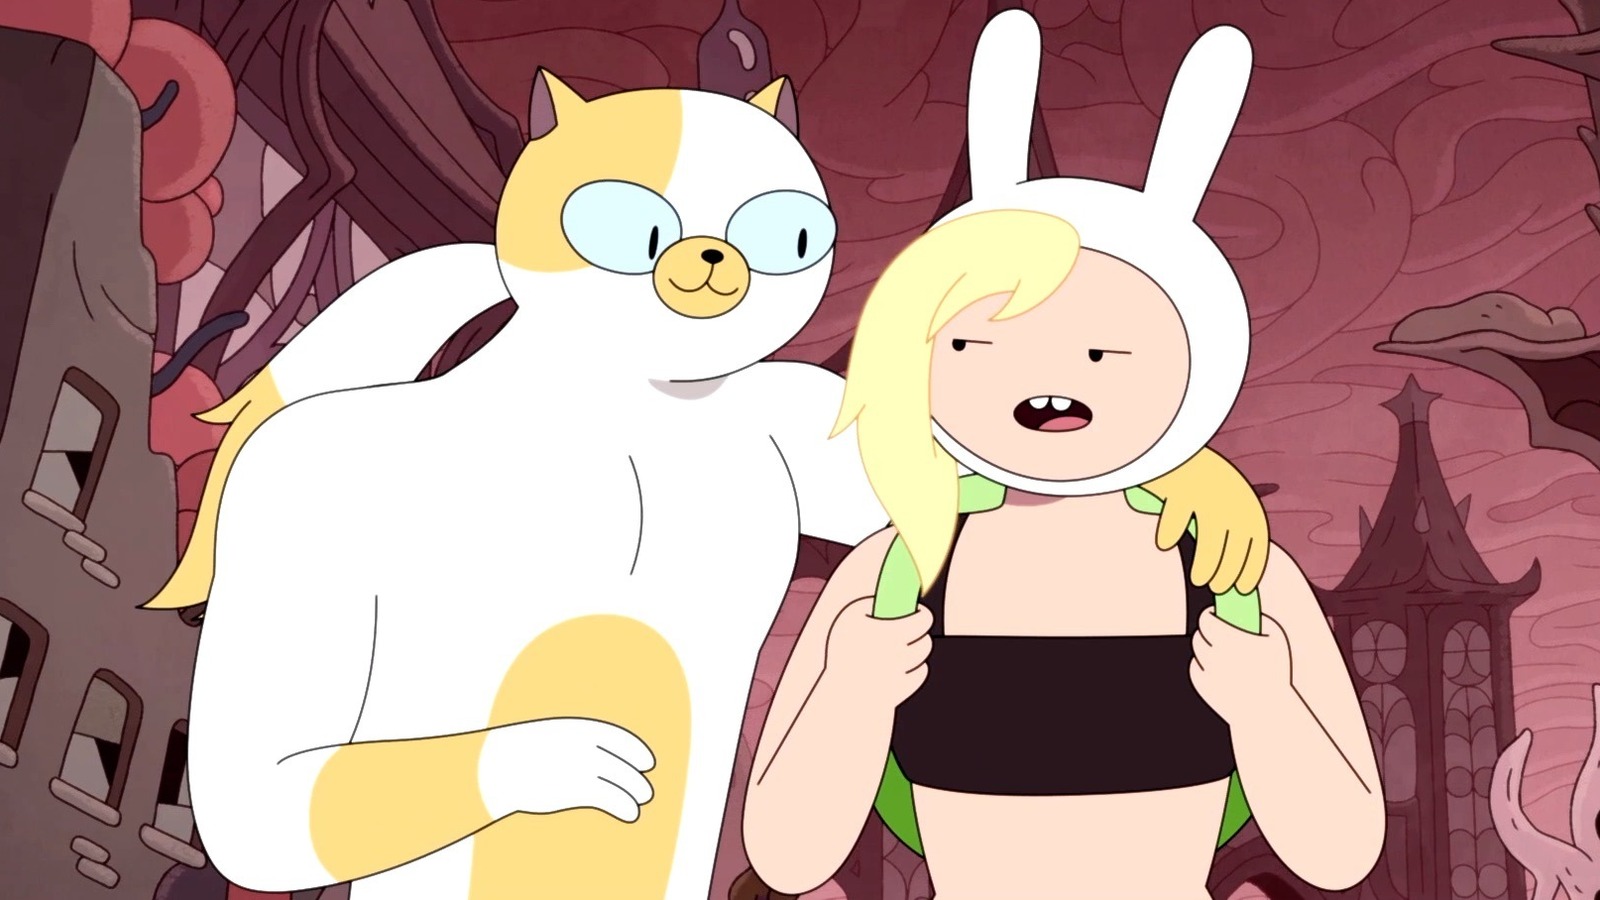 Adventure Time: Fionna and Cake Review - IGN